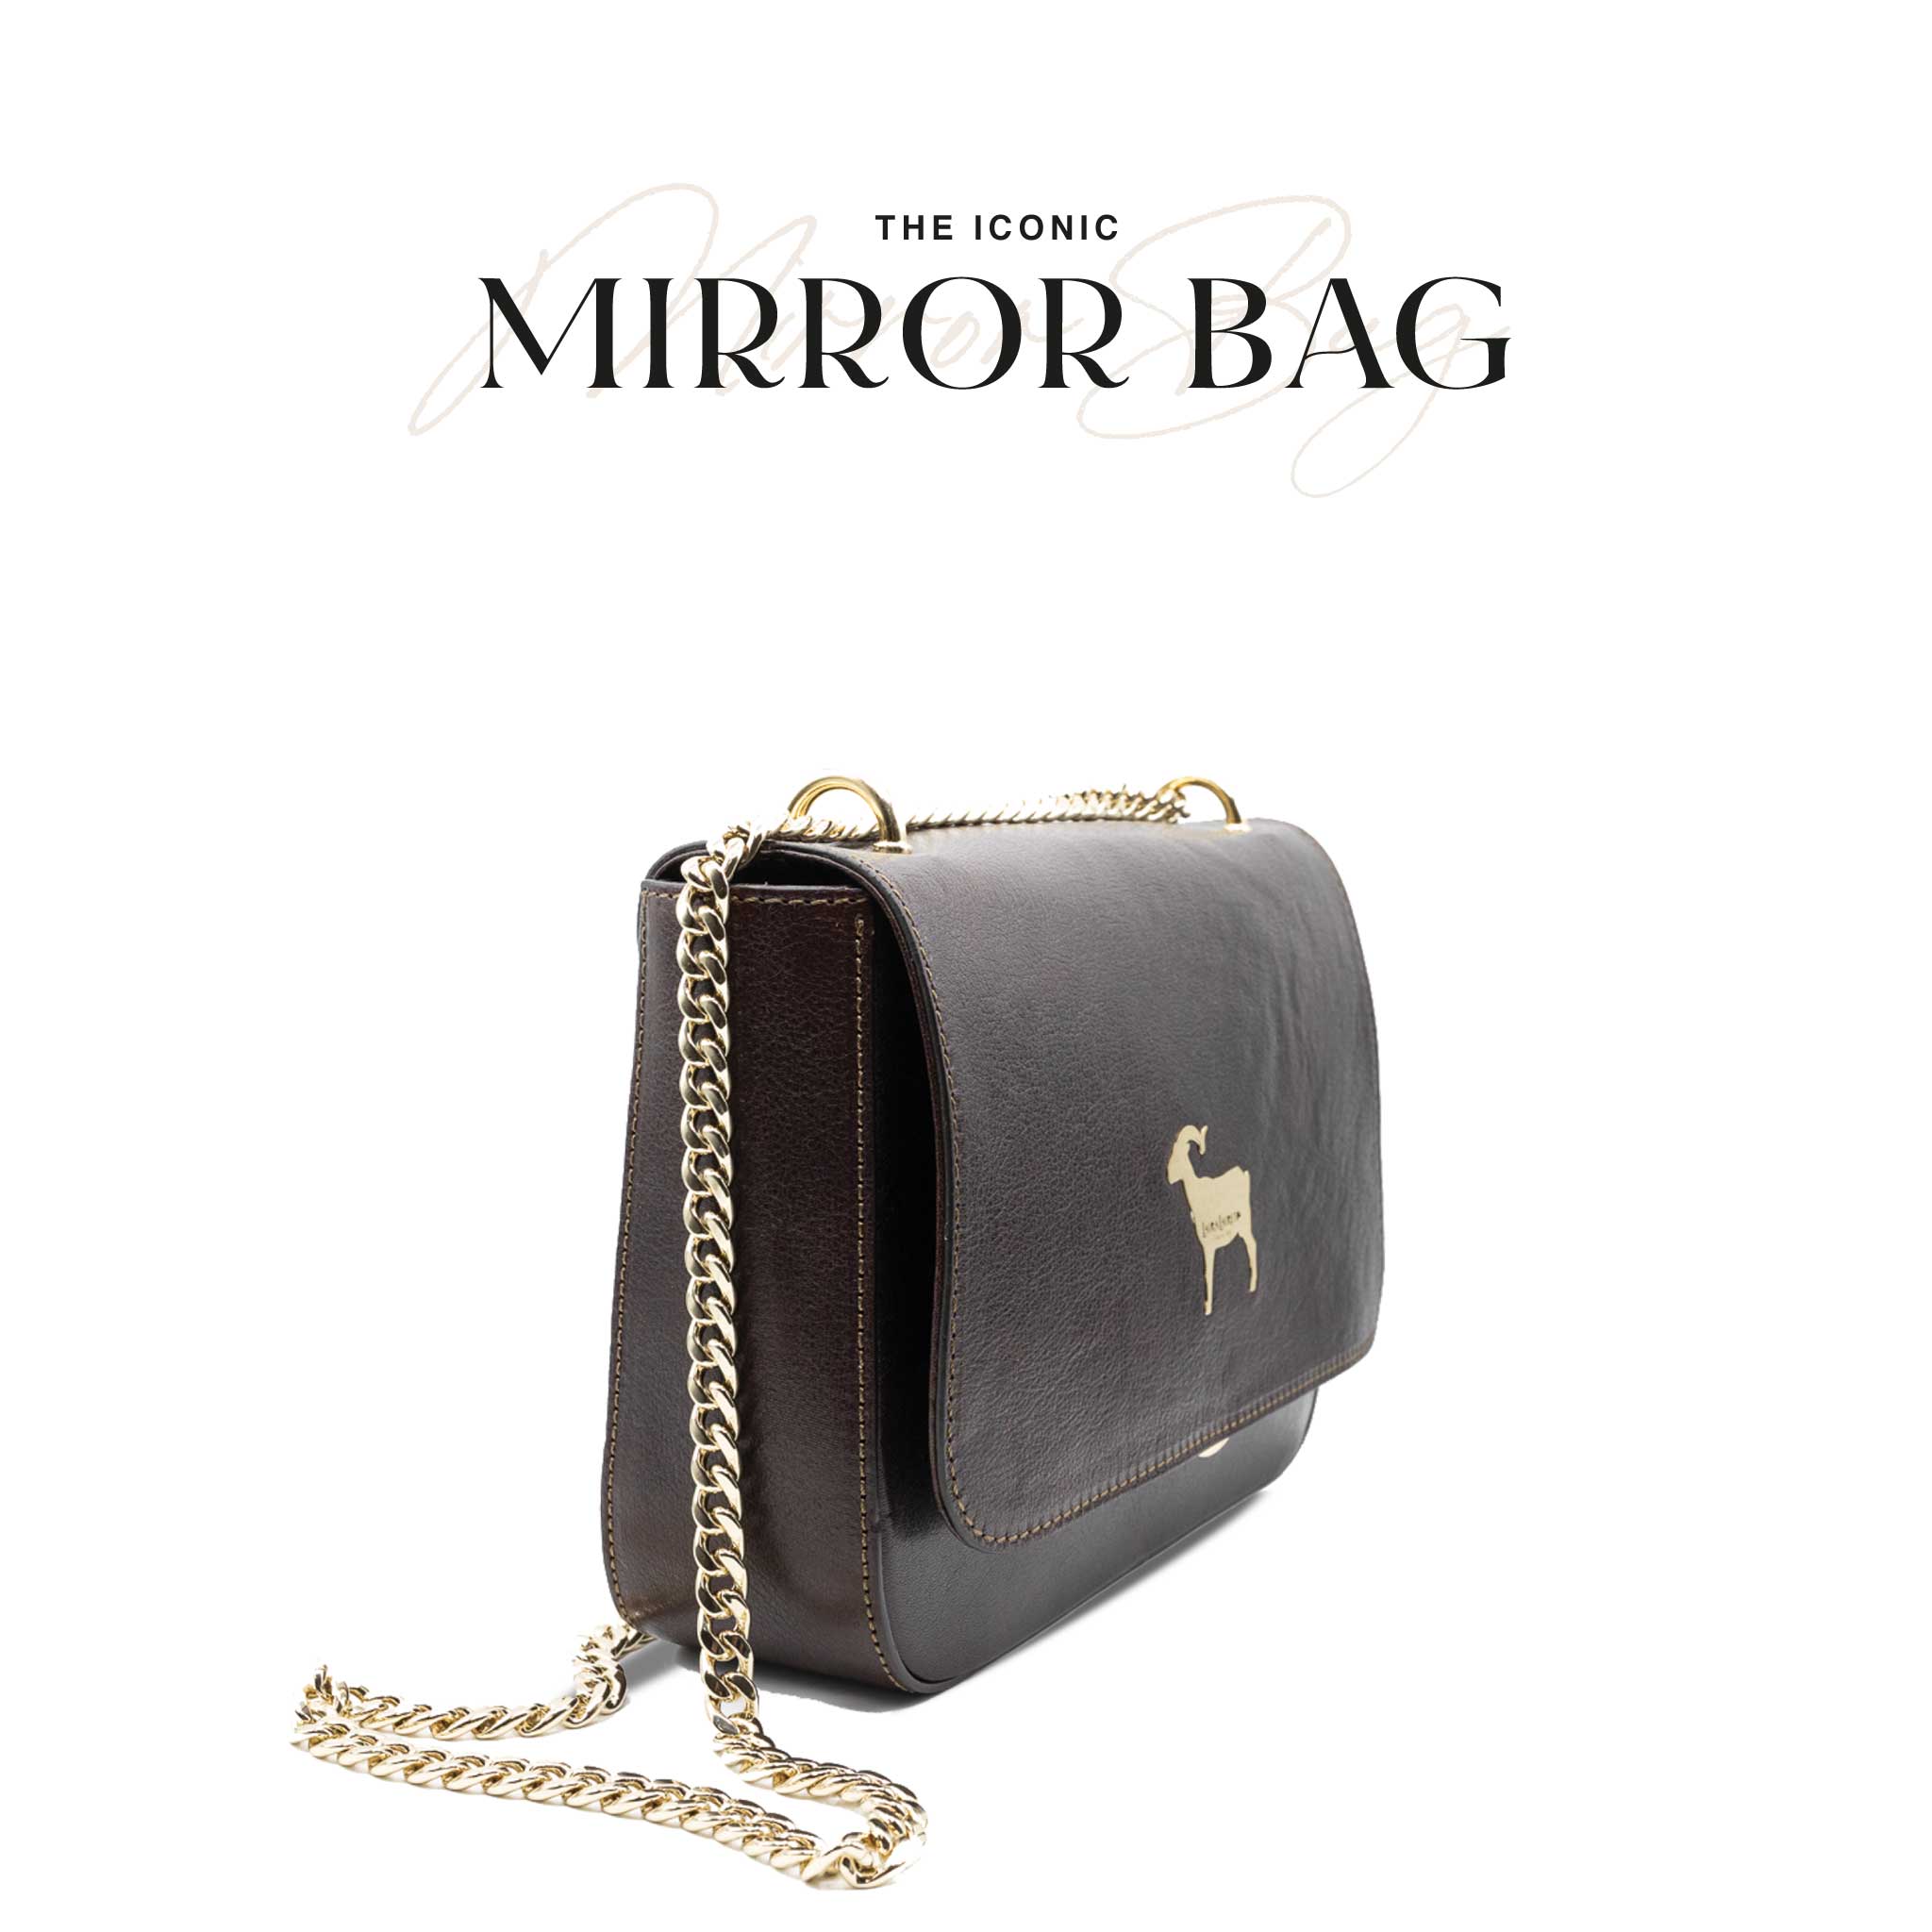 The Iconic Mirror Bag "GOAT"®